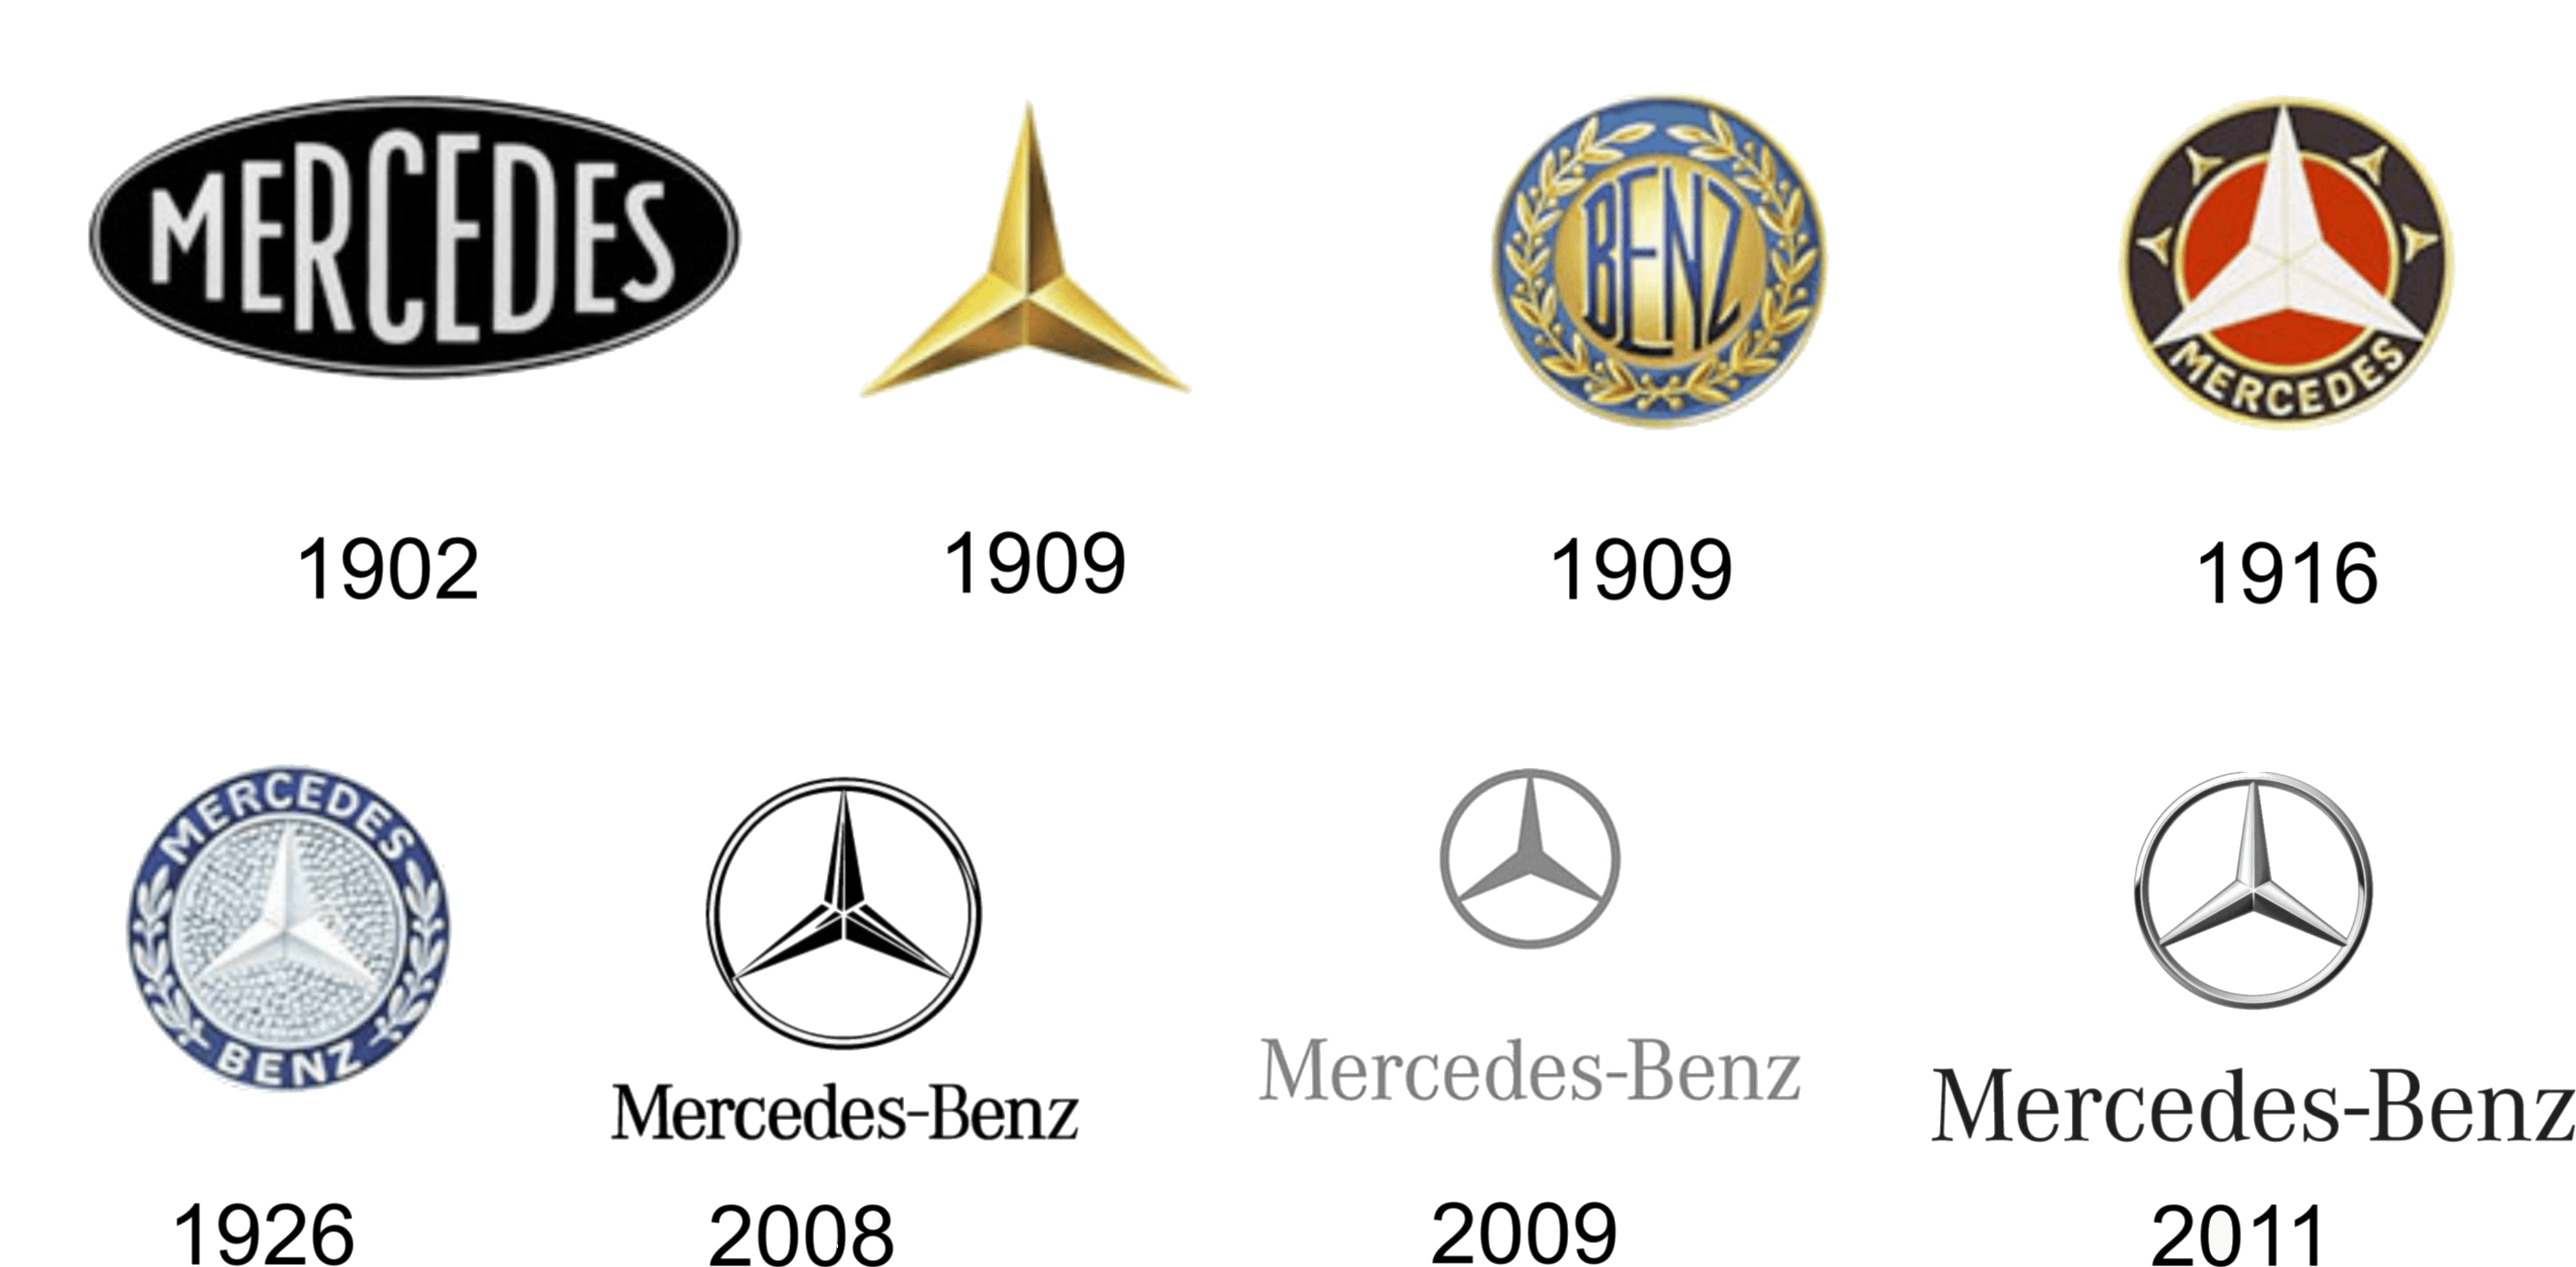 Mercedes-Benz Logo - Mercedes Logo, Mercedes-Benz Car Symbol Meaning and History | Car ...